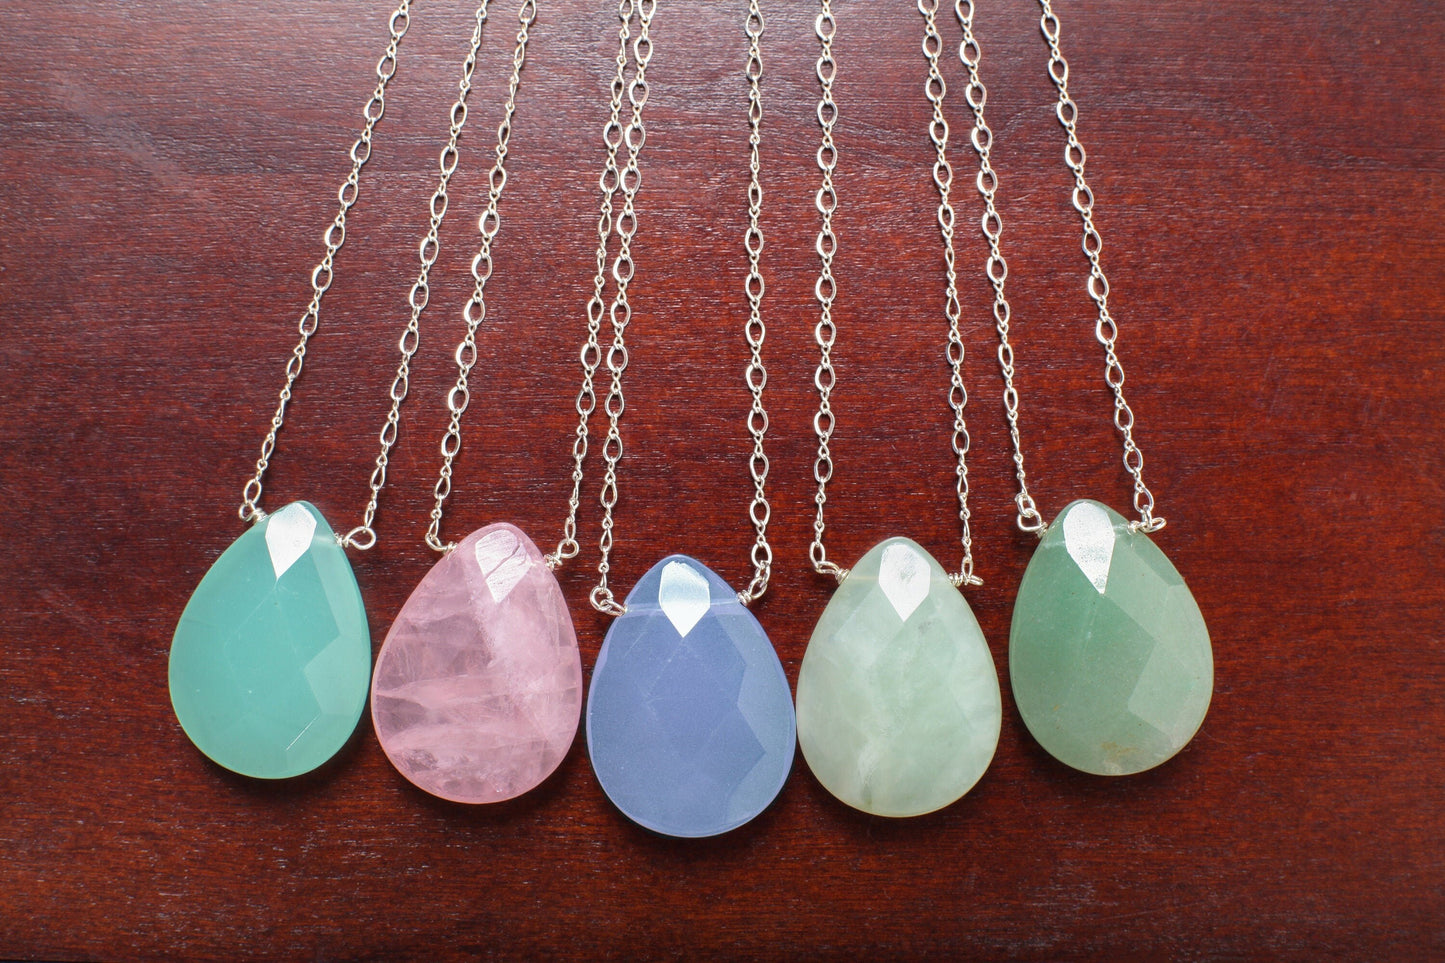 Aqua Chalcedony Faceted Pear Drop 22x30mm, Natural Gemstones in 925 Sterling Silver Chain or 14K Gold Filled Chain